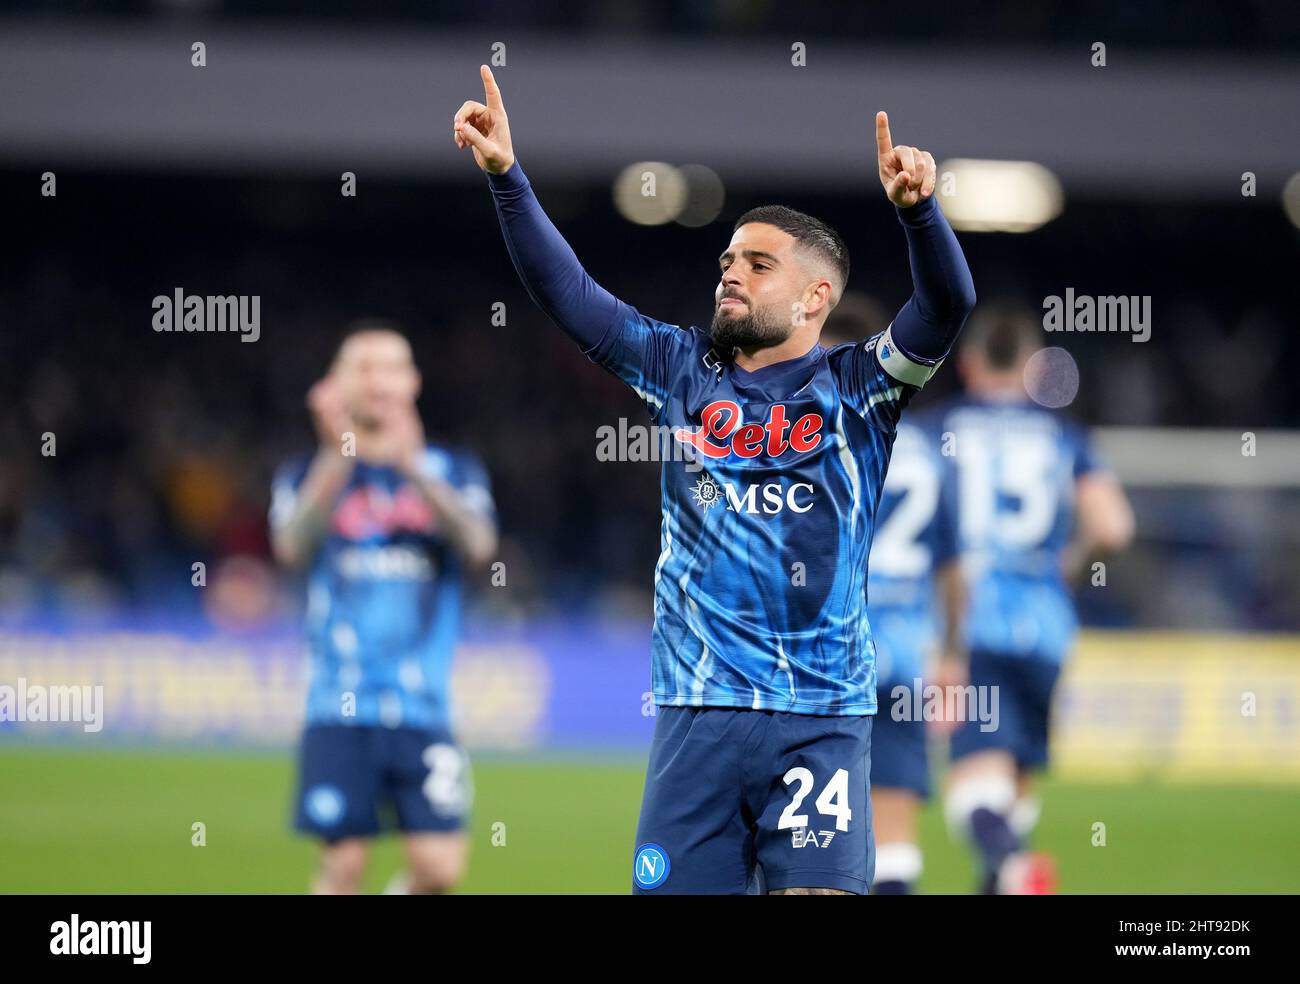 NAPLES, ITALY - FEBRUARY 12: Lorenzo Insigne of SSc Napoli celebrates after scores his Penalty goal ,during the Serie A match between SSC Napoli and FC Internazionale at Stadio Diego Armando Maradona on February 12, 2022 in Naples, Italy. (Photo by MB Media) Stock Photo